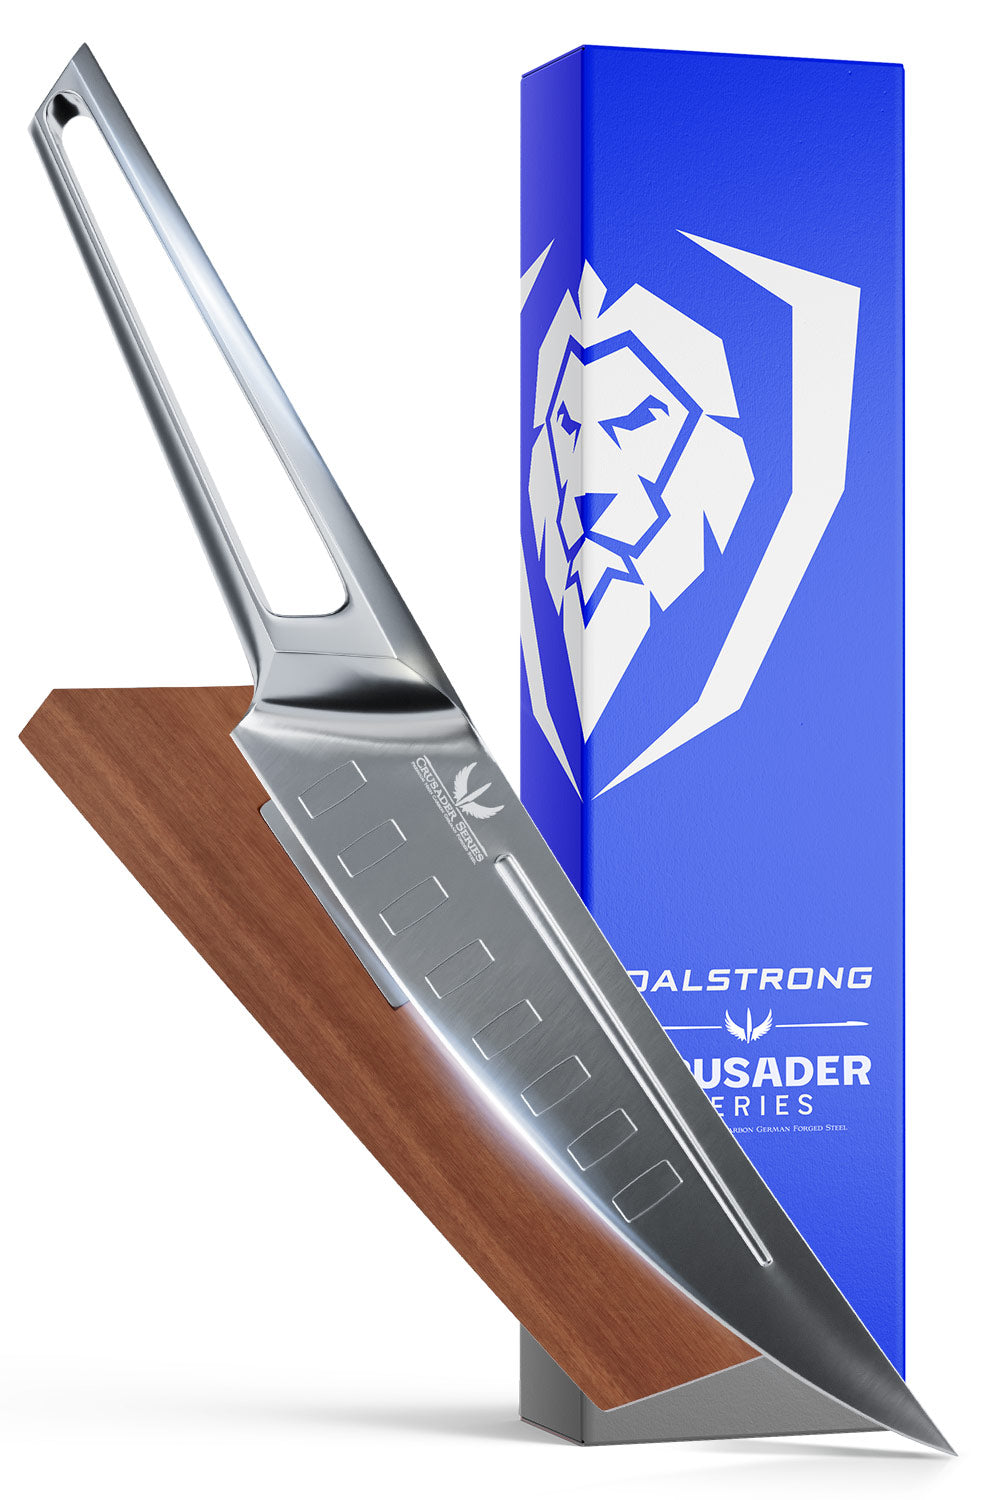 Dalstrong crusader series 6.5 inch fillet knife with german steel handle in front of it's premium packaging.